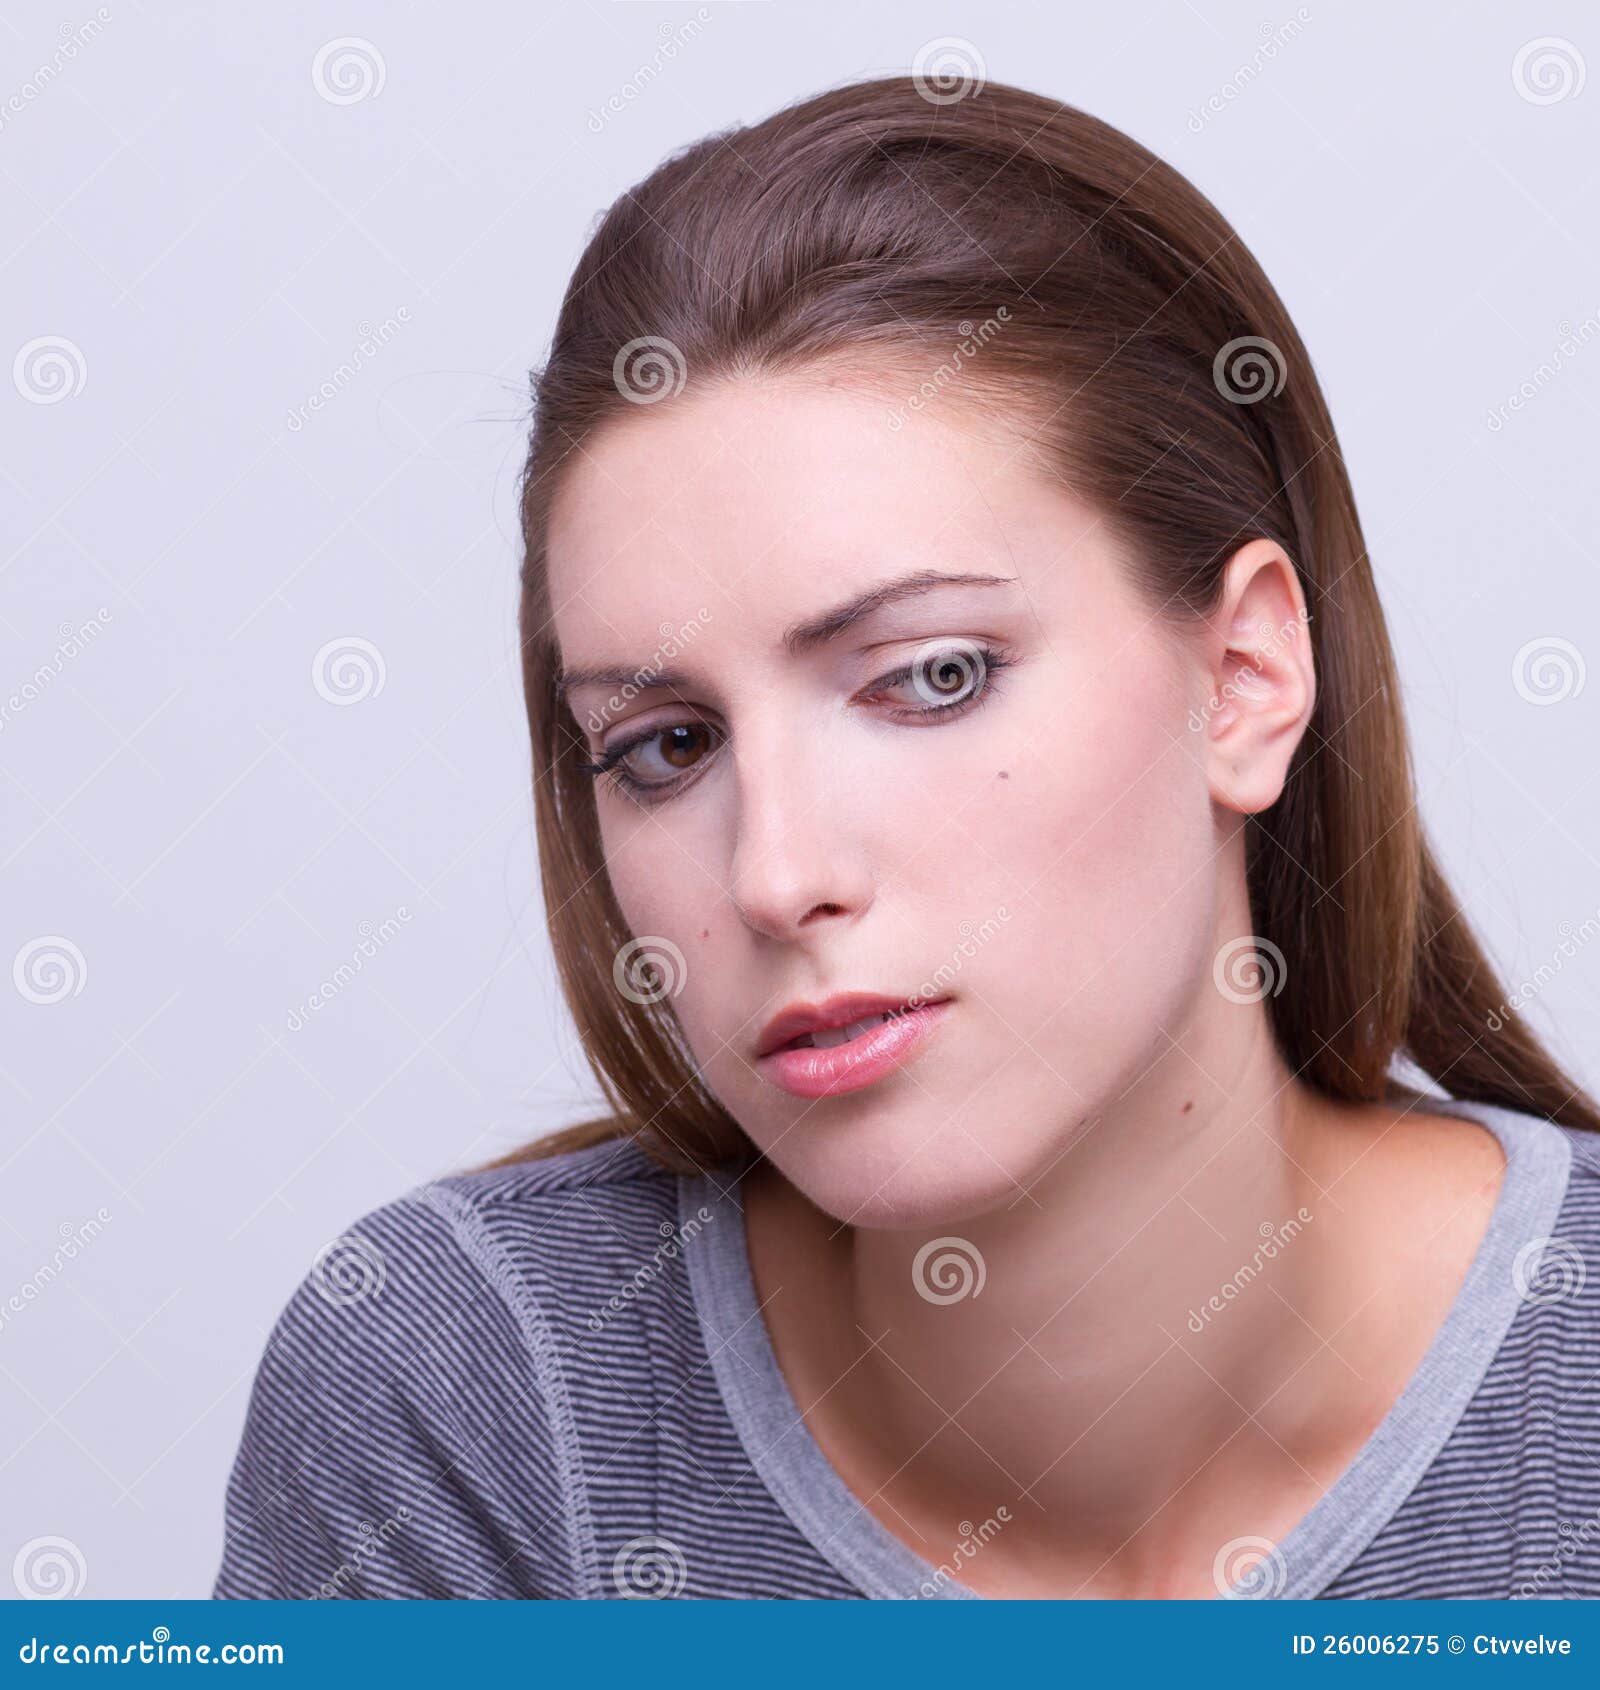 Young Beautiful Girl Suspicious Stock Image - Image of face, beauty ...